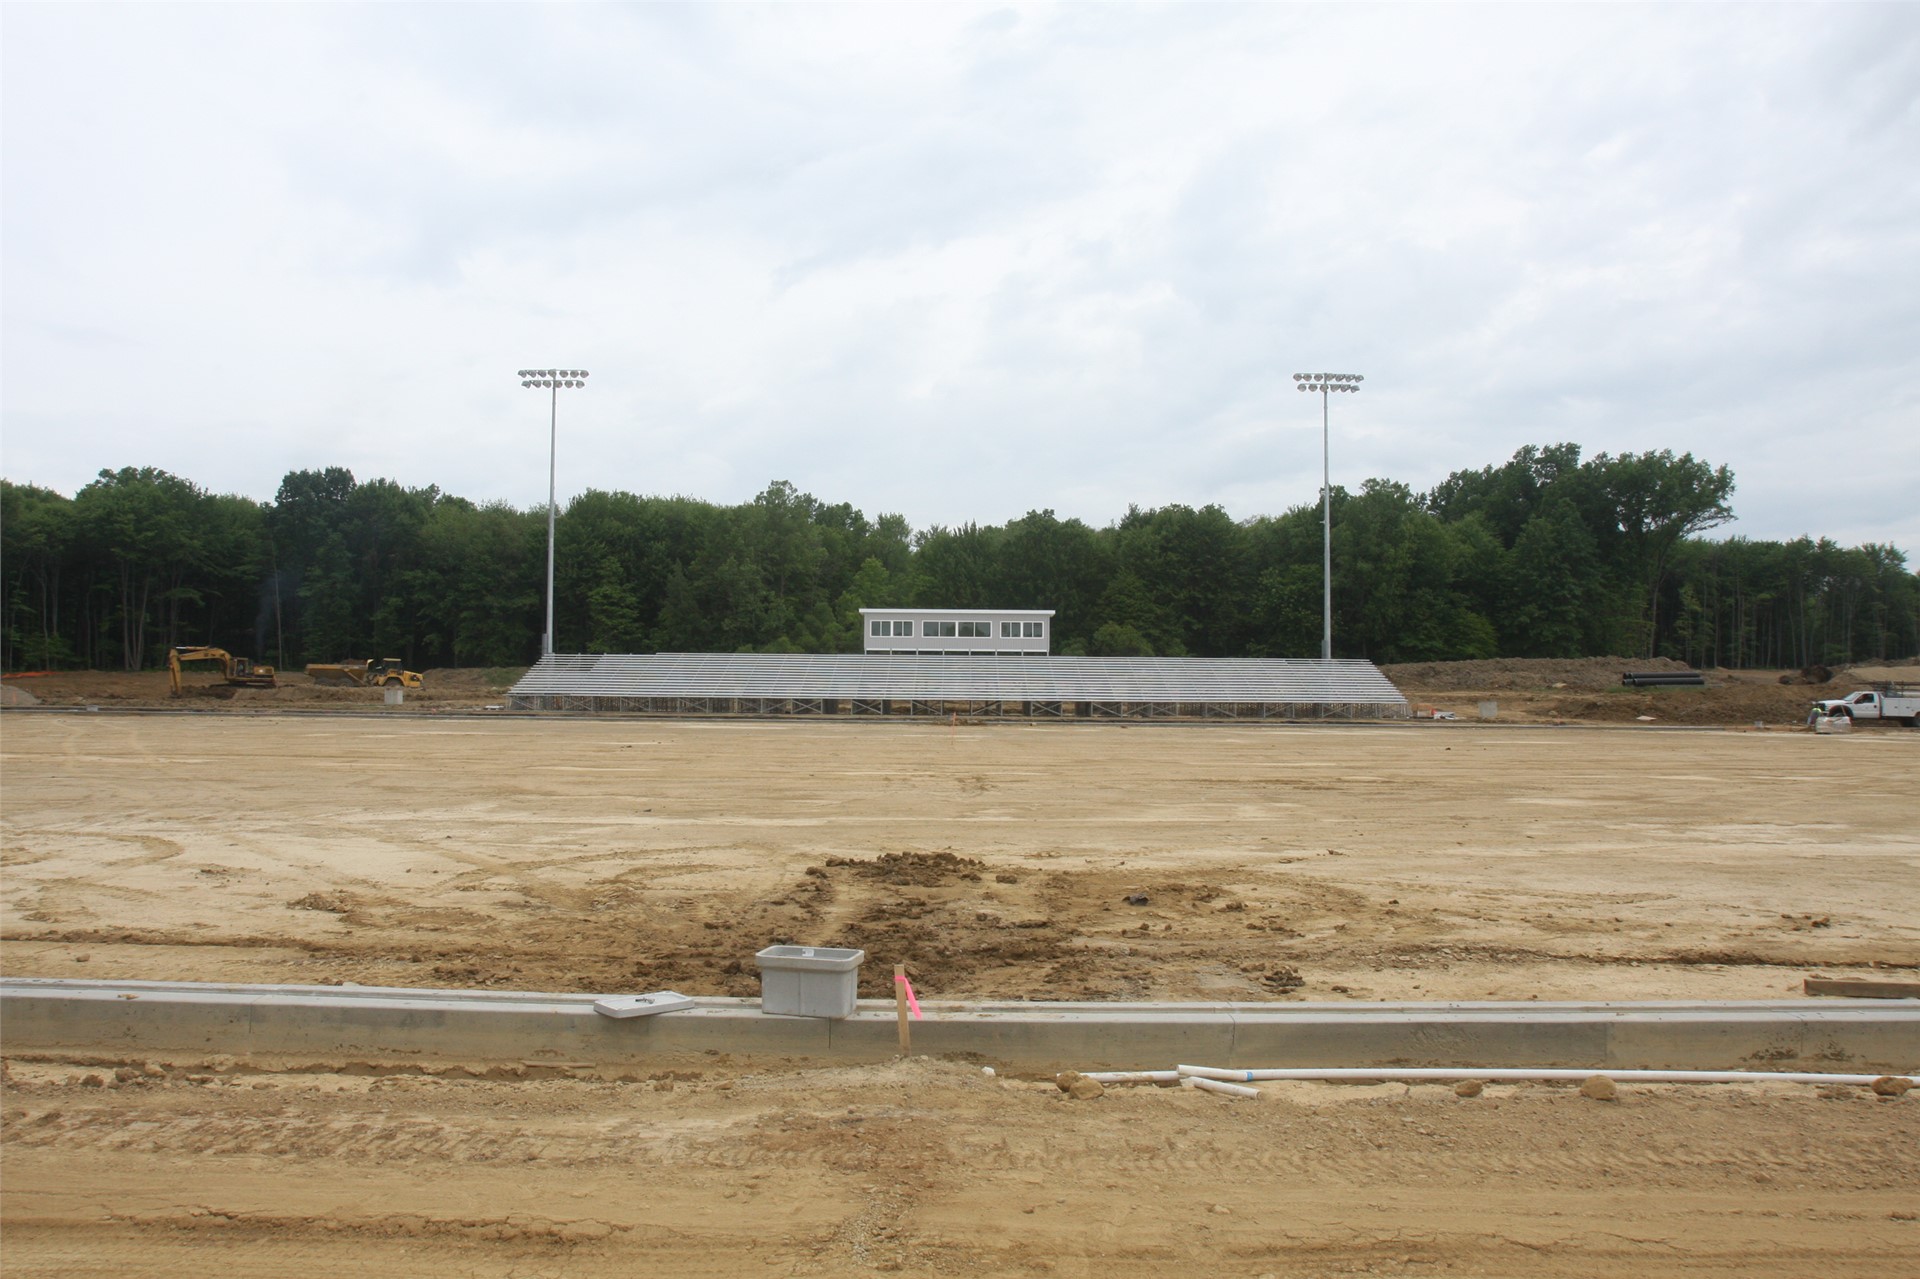 View of home stands and field from 50 yard line at visitor stands